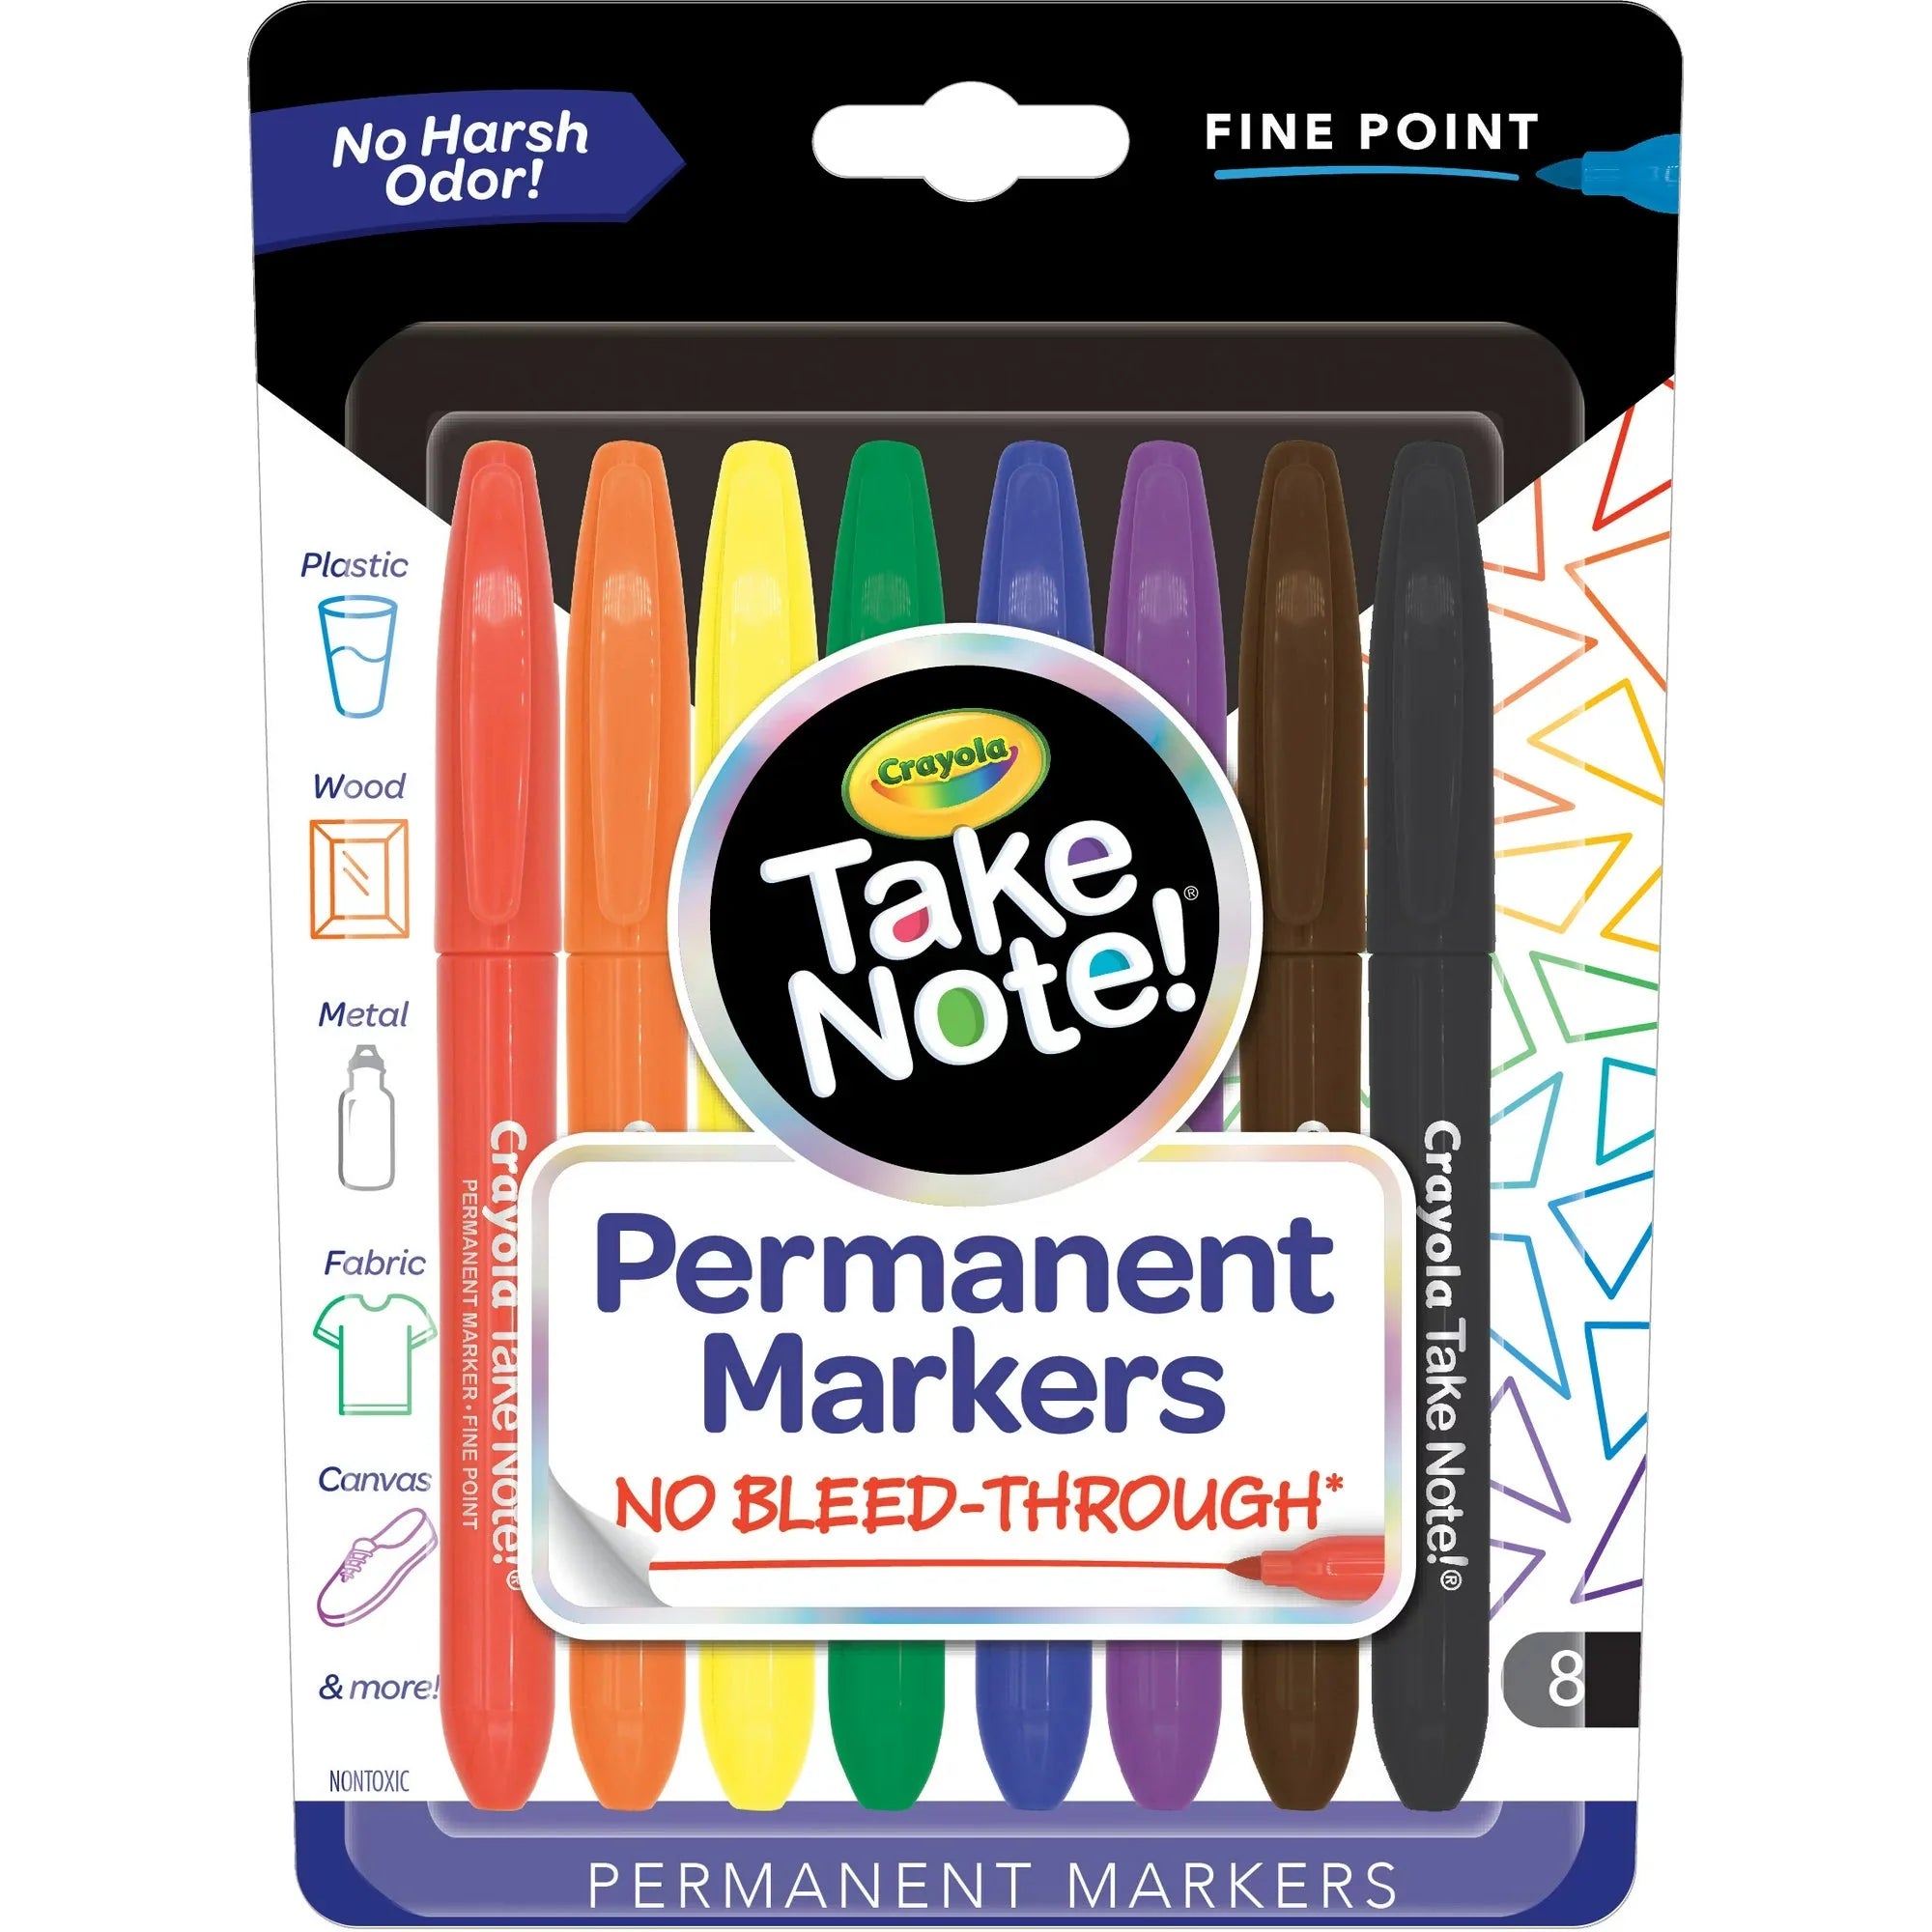 Wholesale prices with free shipping all over United States Crayola Take Note Permanent Markers, 8 Count Assorted Colors - Steven Deals